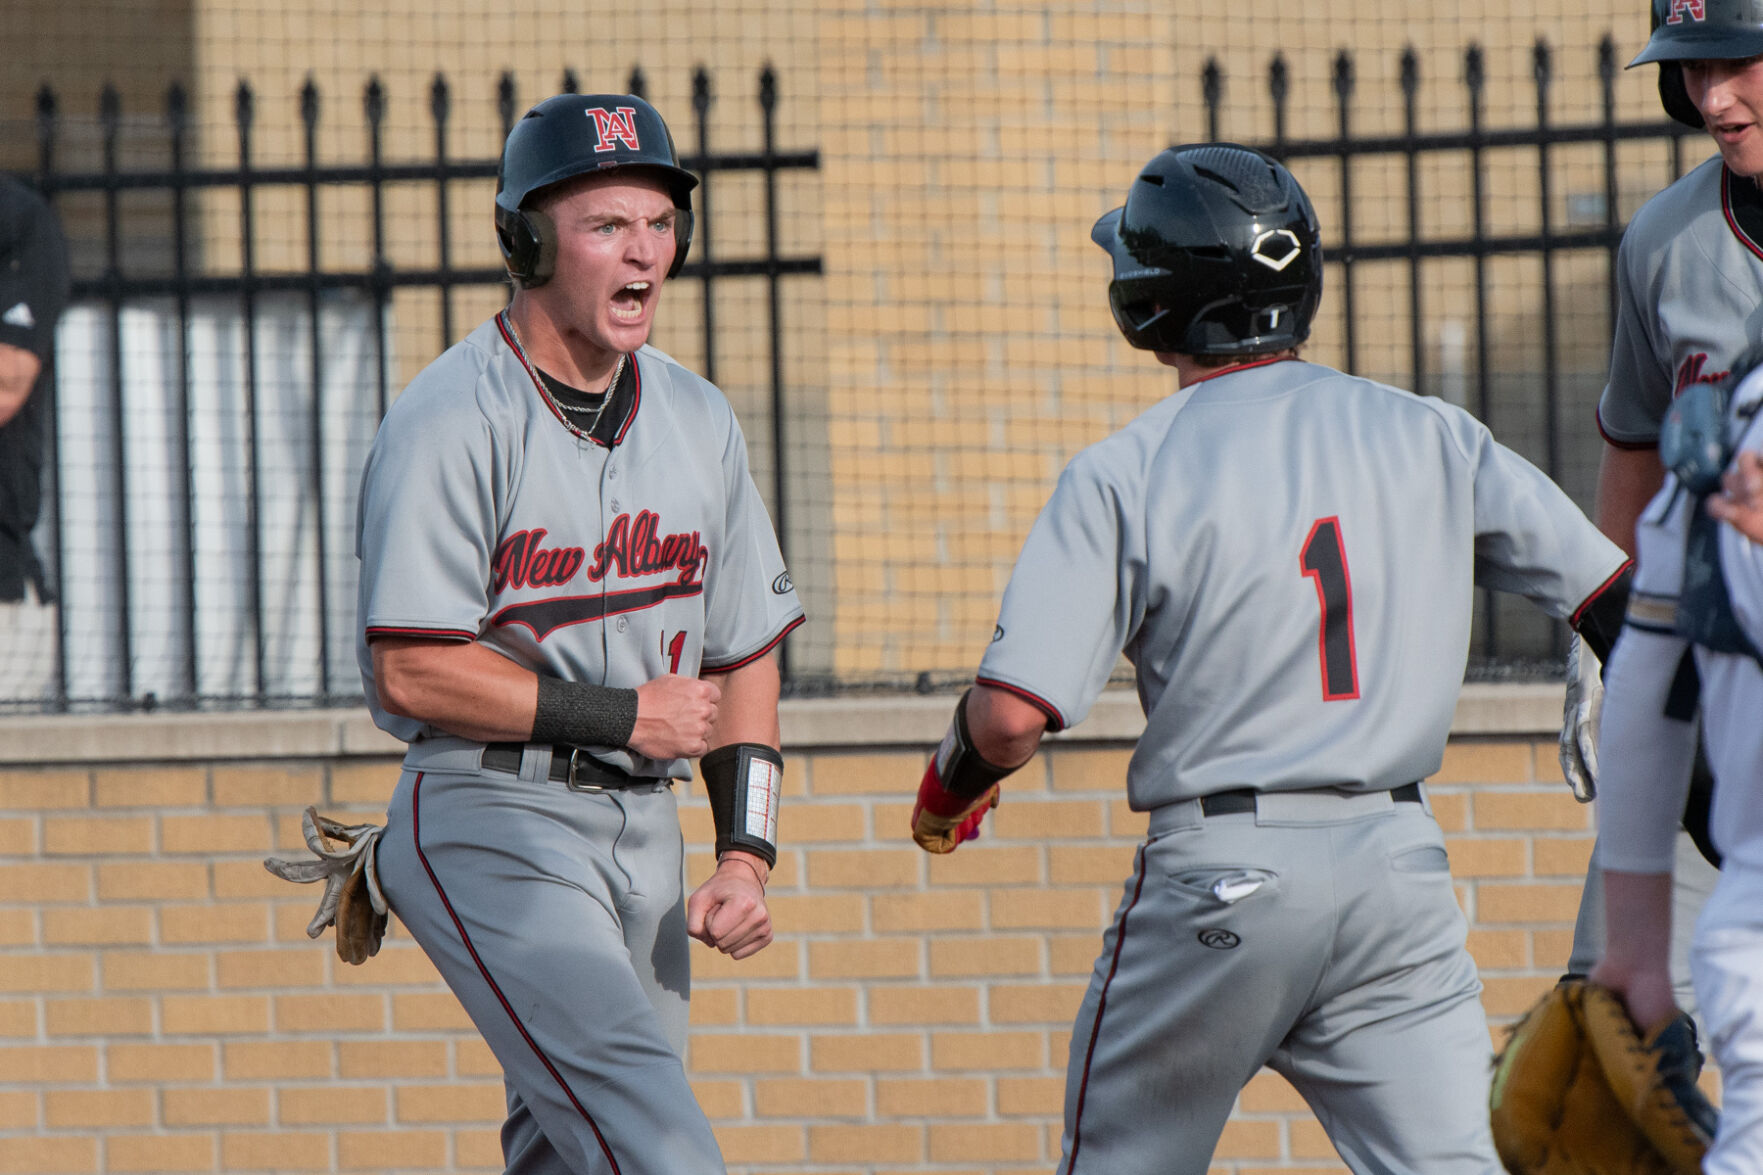 HIGH SCHOOL BASEBALL: Loesch leads New Albany past Providence